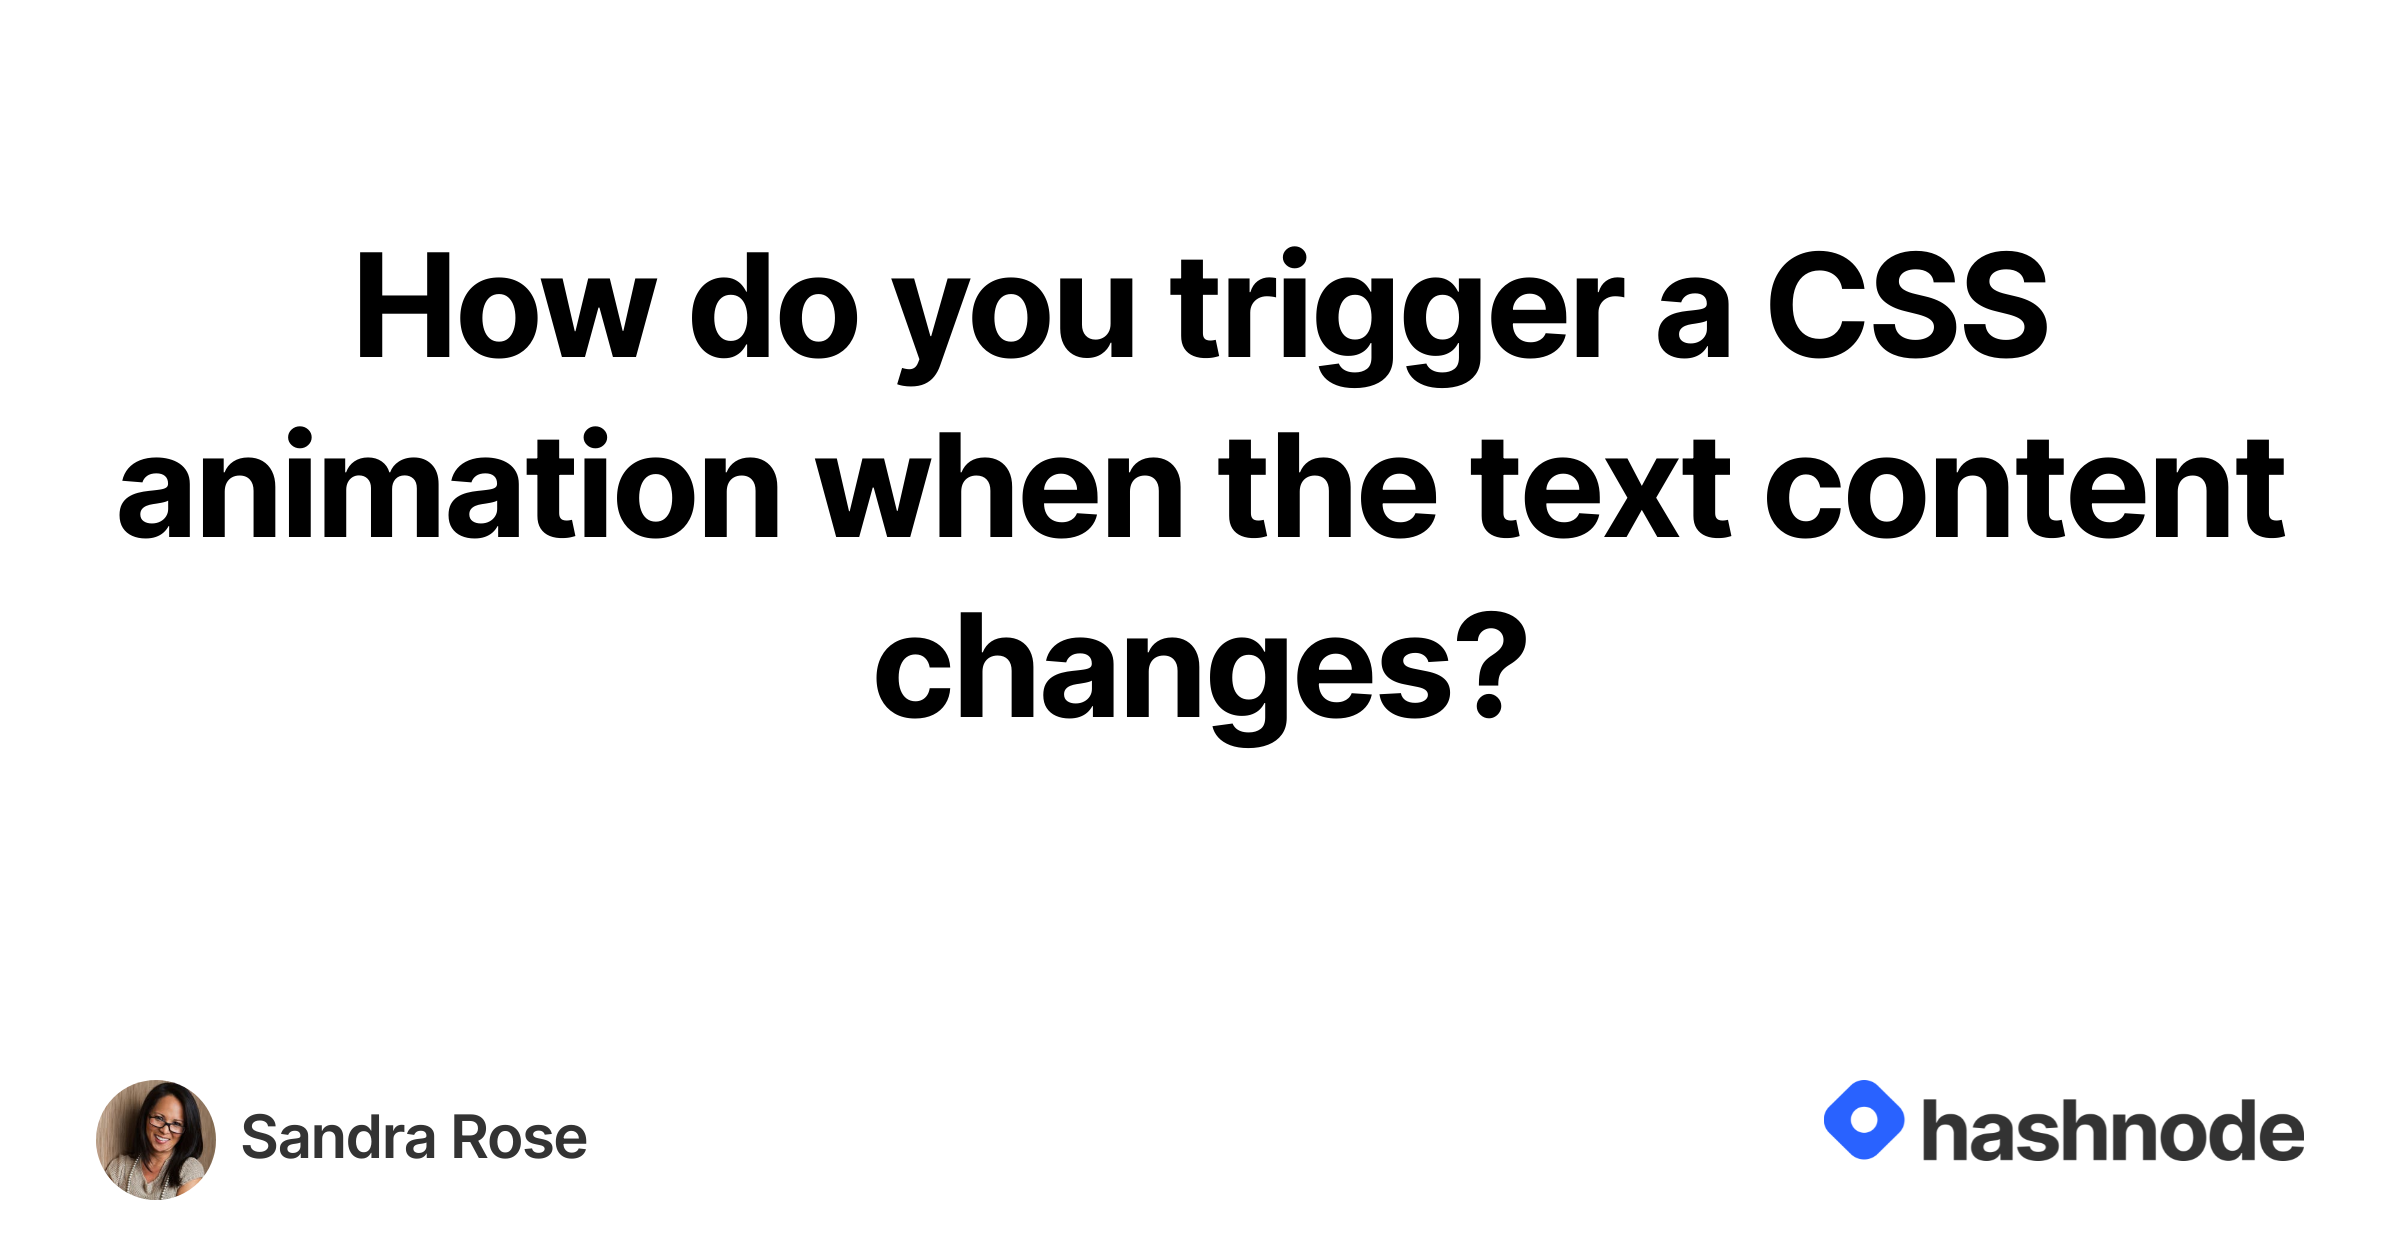 How do you trigger a CSS animation when the text content changes? - Hashnode